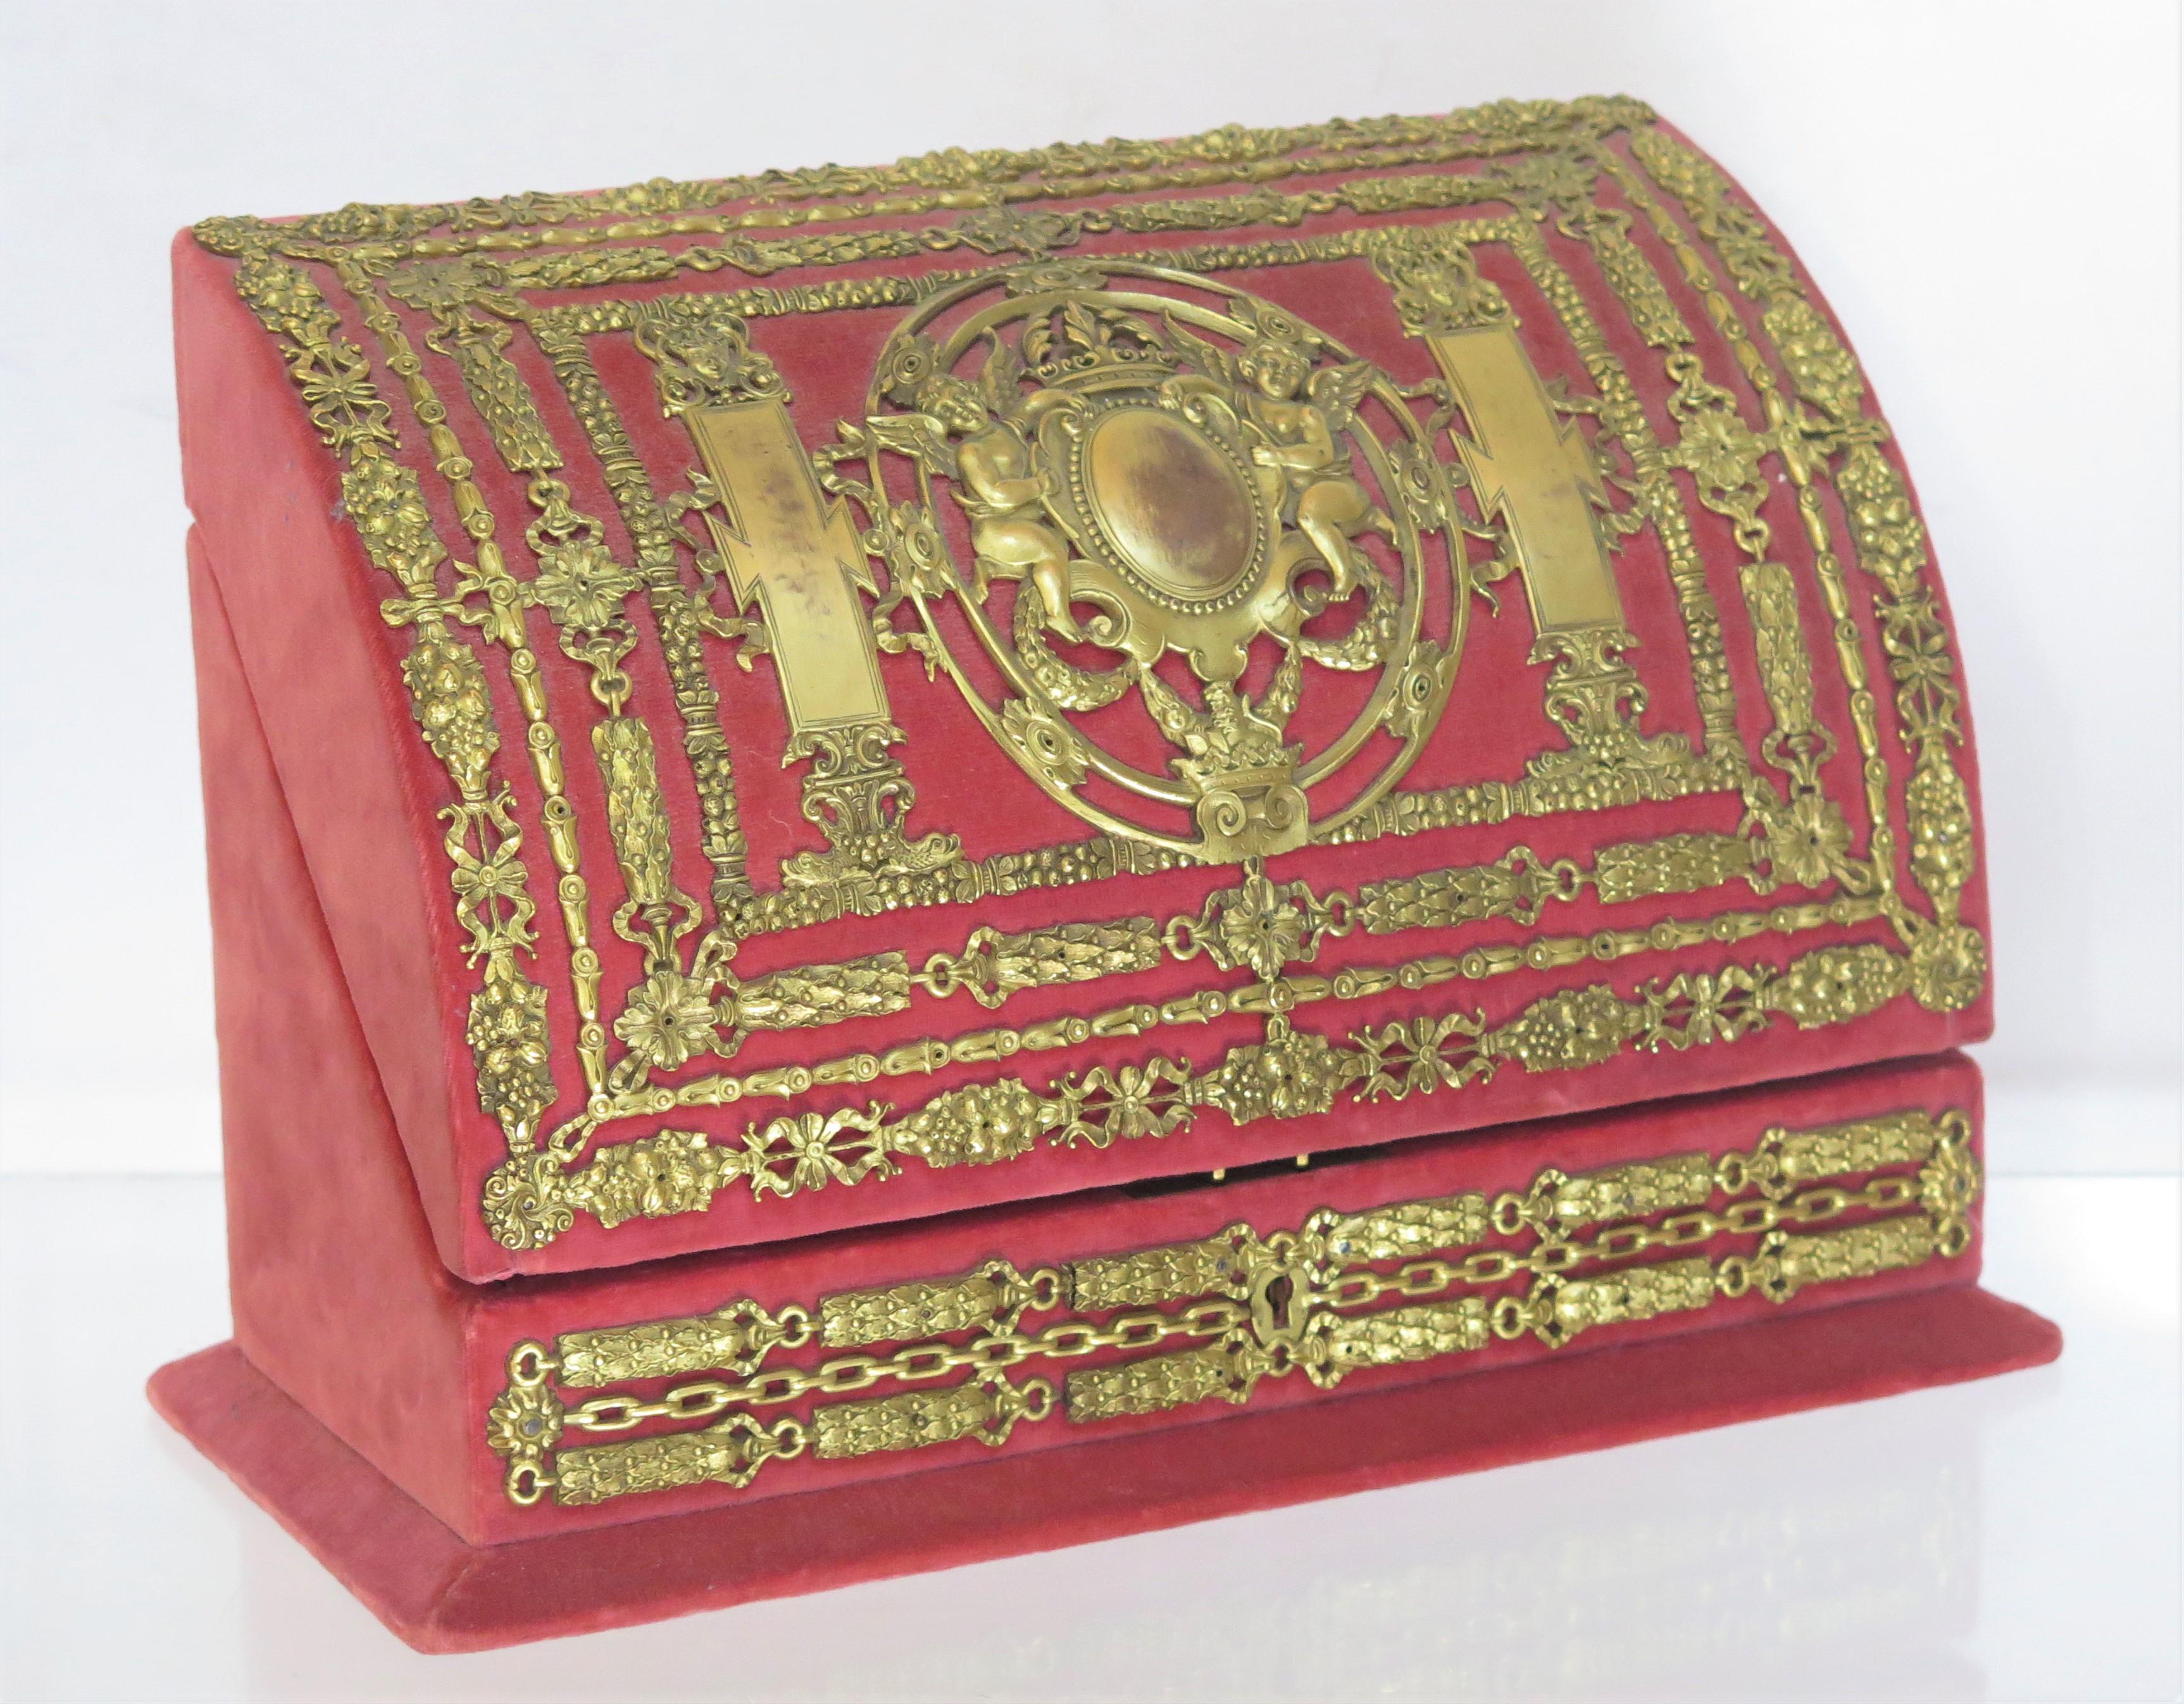 gilt bronze mounted rose velvet letter box with putti flanking an elaborate central shield / cartouche in the style of Edward F. Caldwell & Co, New York. New York, the interior is fitted with various compartments, English, 20th century

some visible